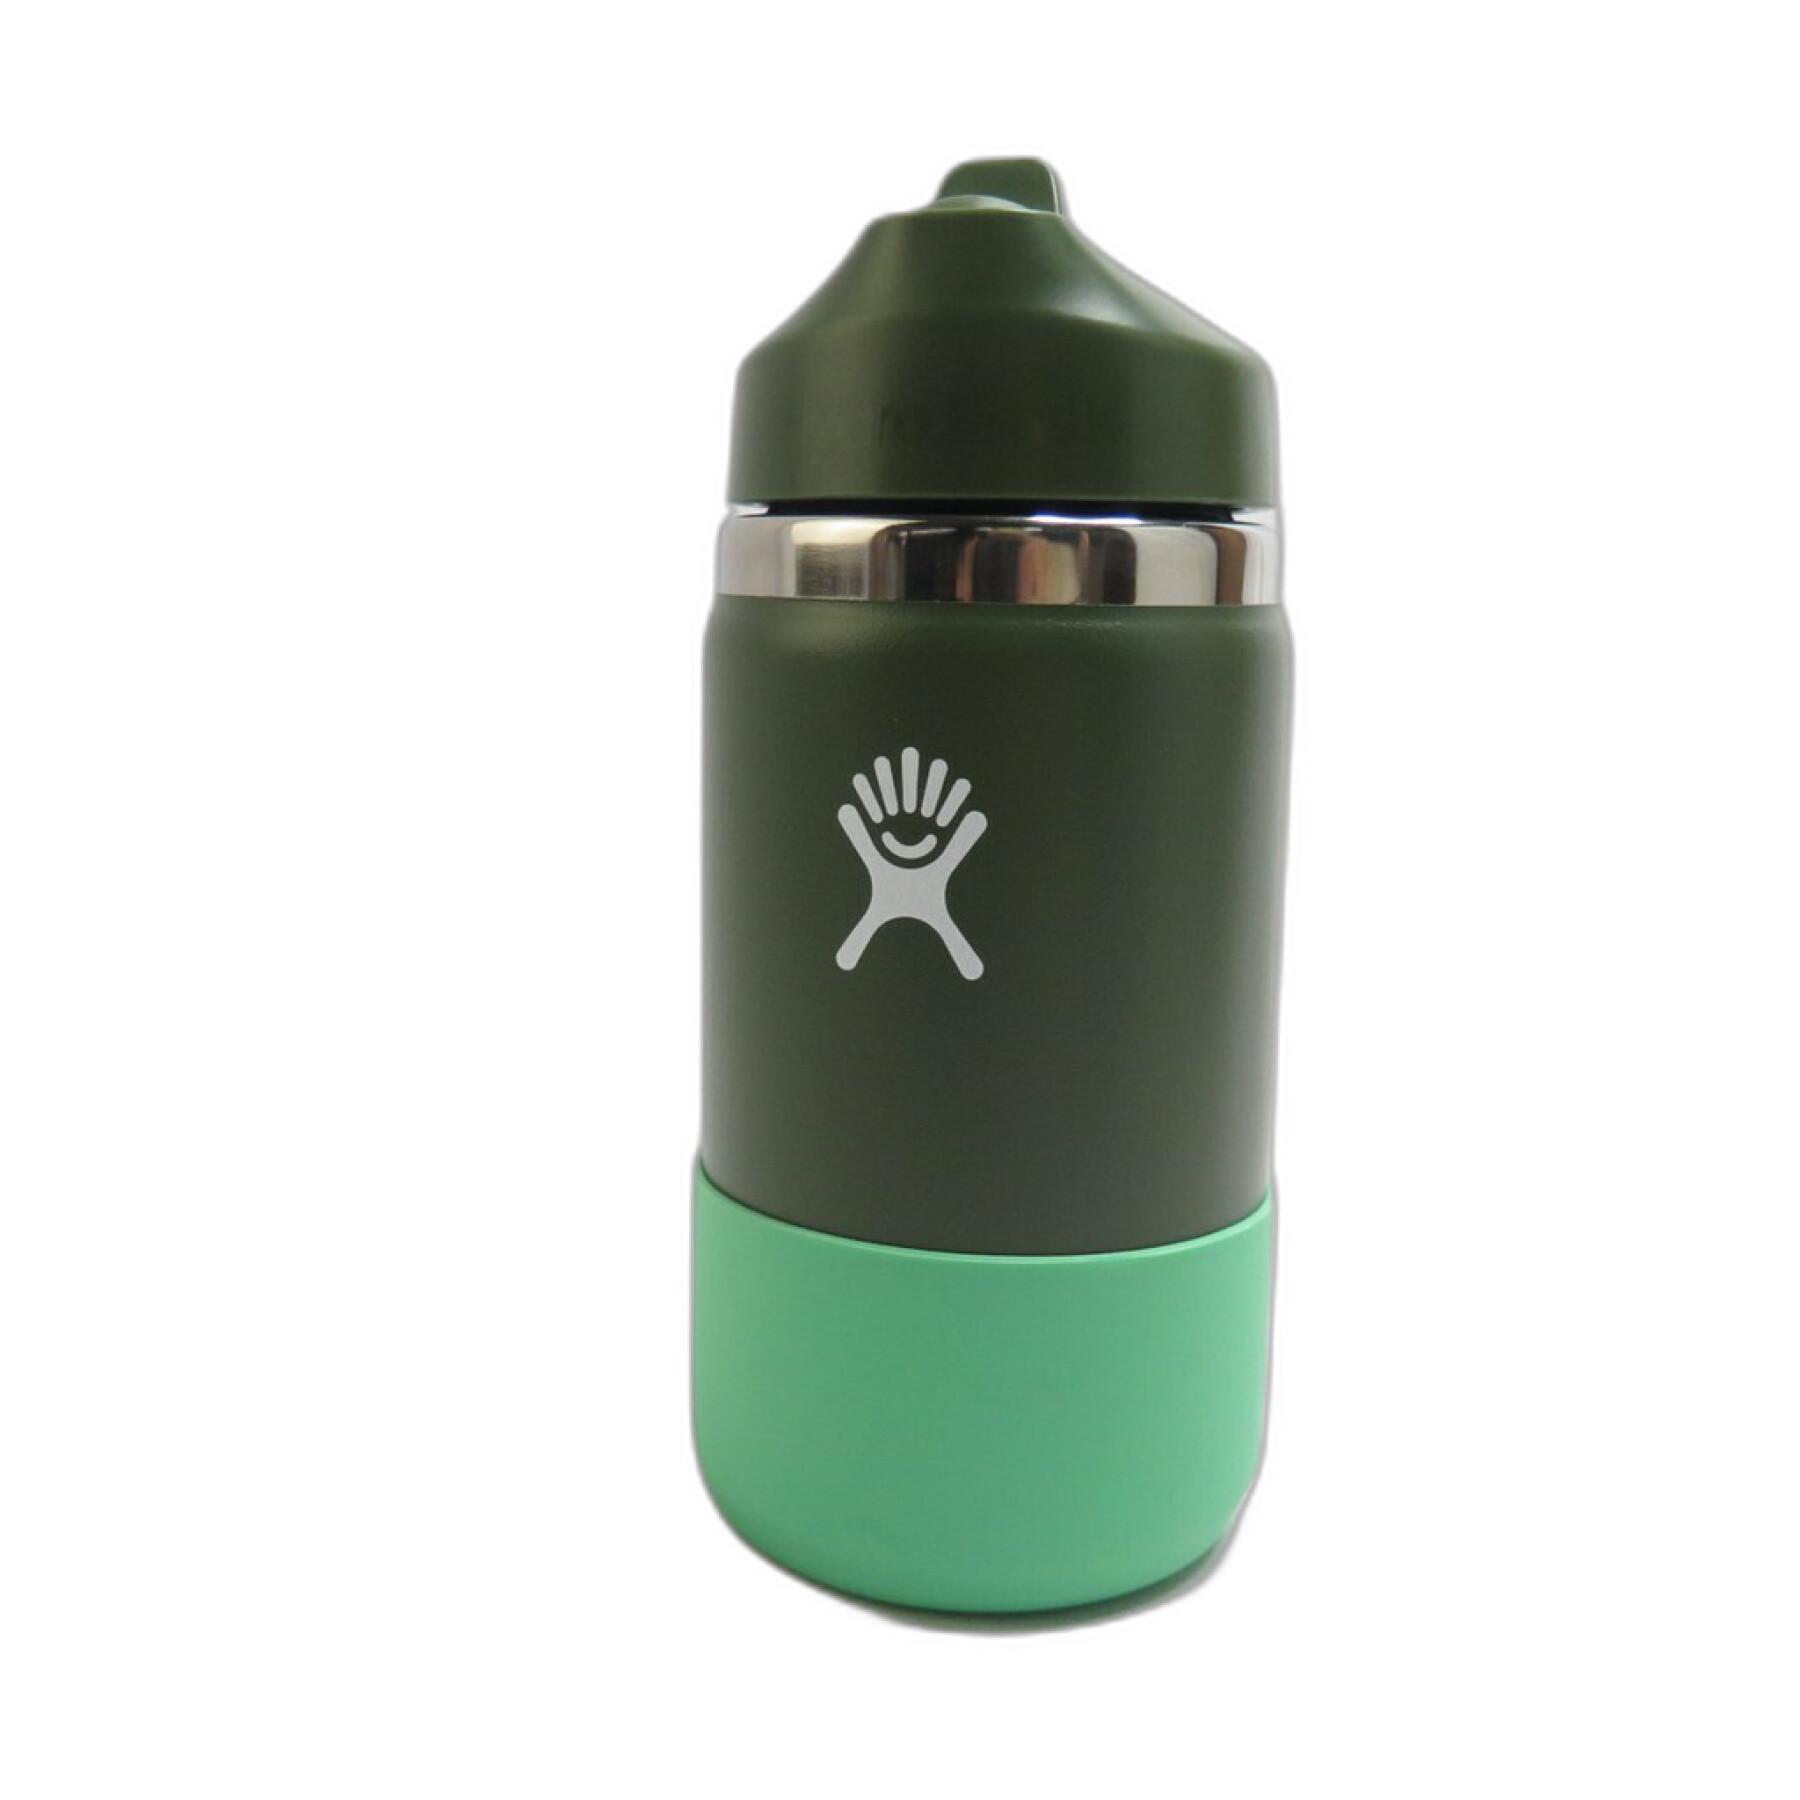 Children's thermos Hydro Flask wide straw lid 12 oz